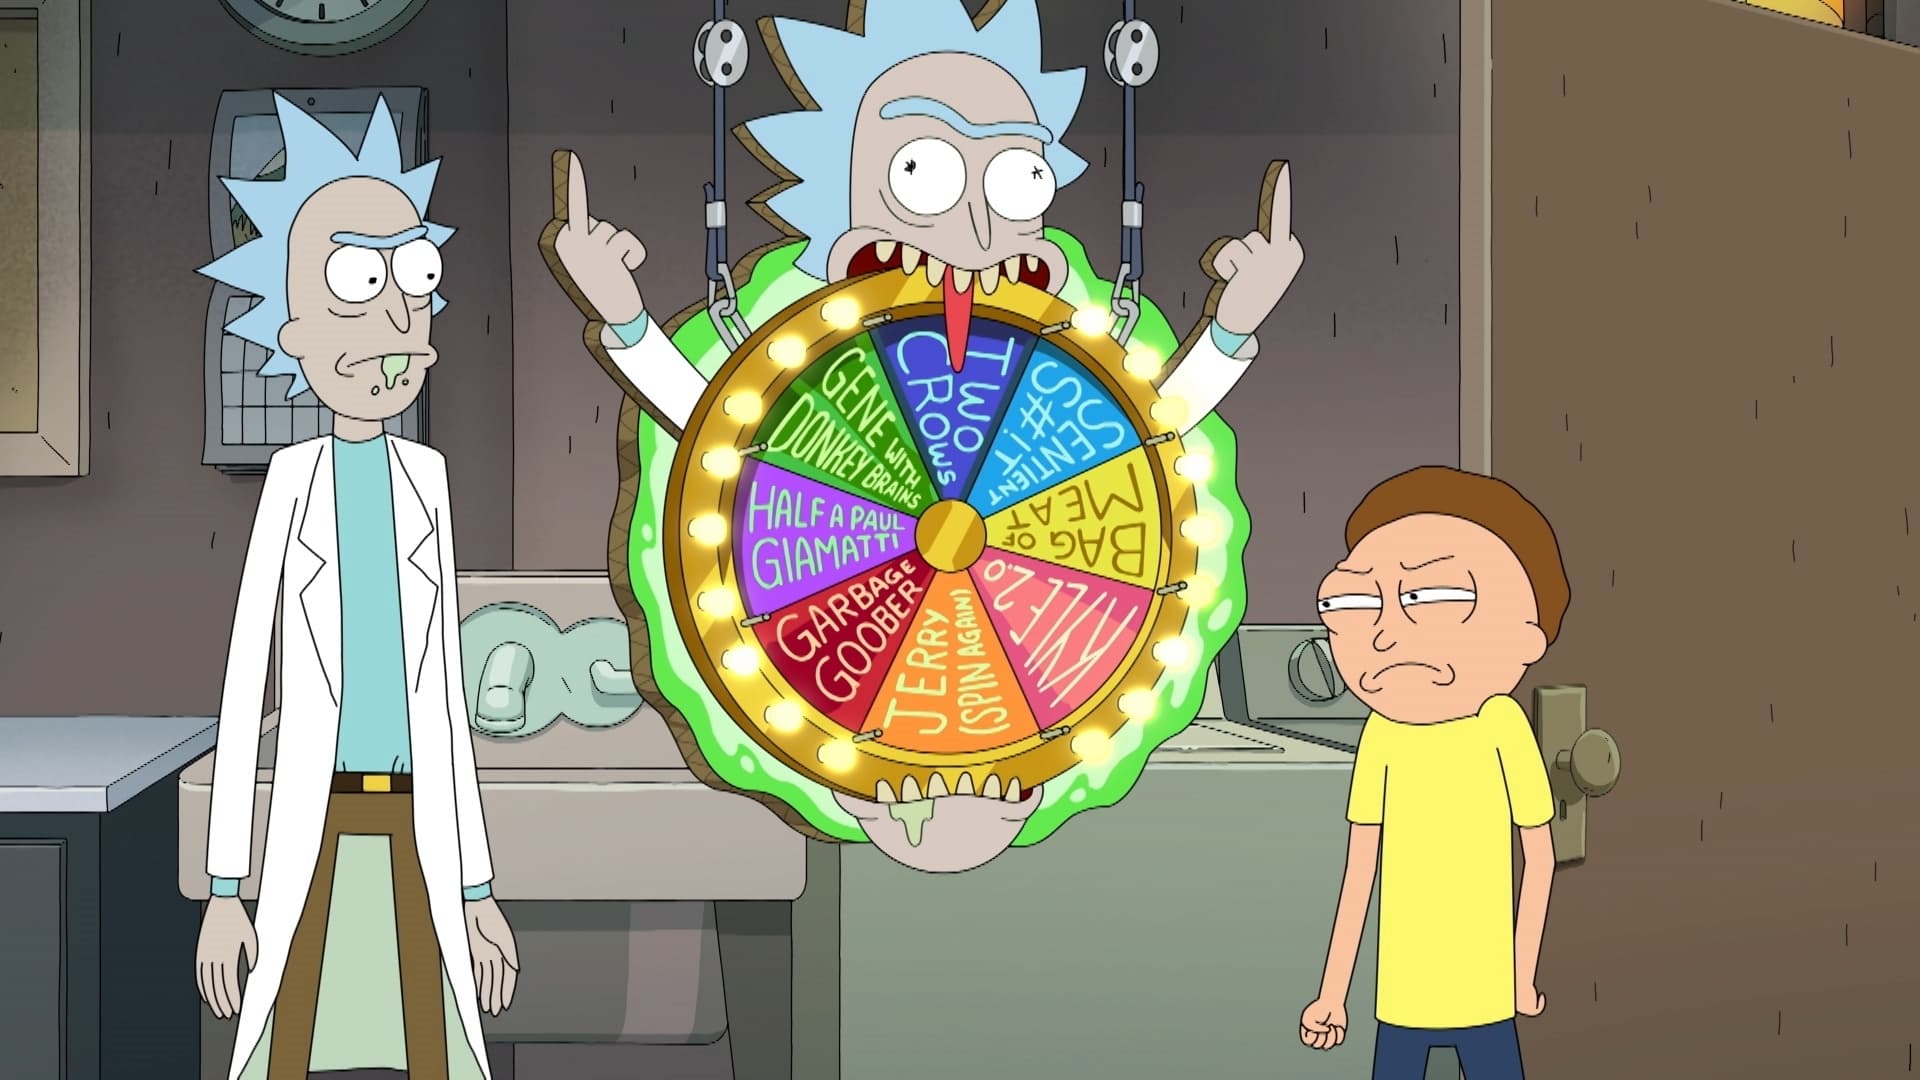 Rick and Morty season 5, episode 9 release date